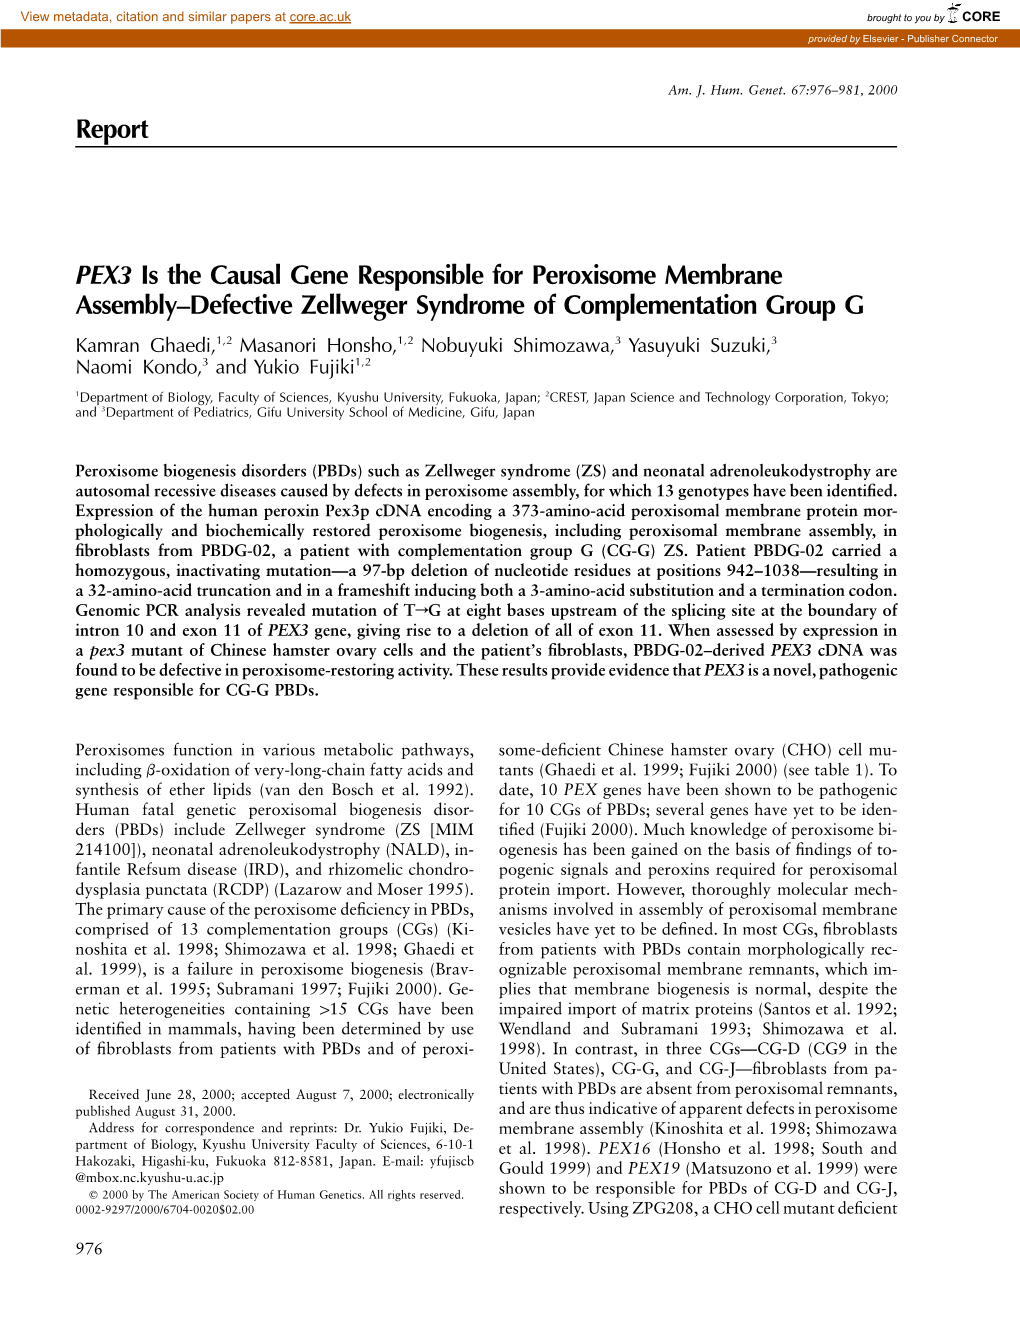 Report PEX3 Is the Causal Gene Responsible for Peroxisome